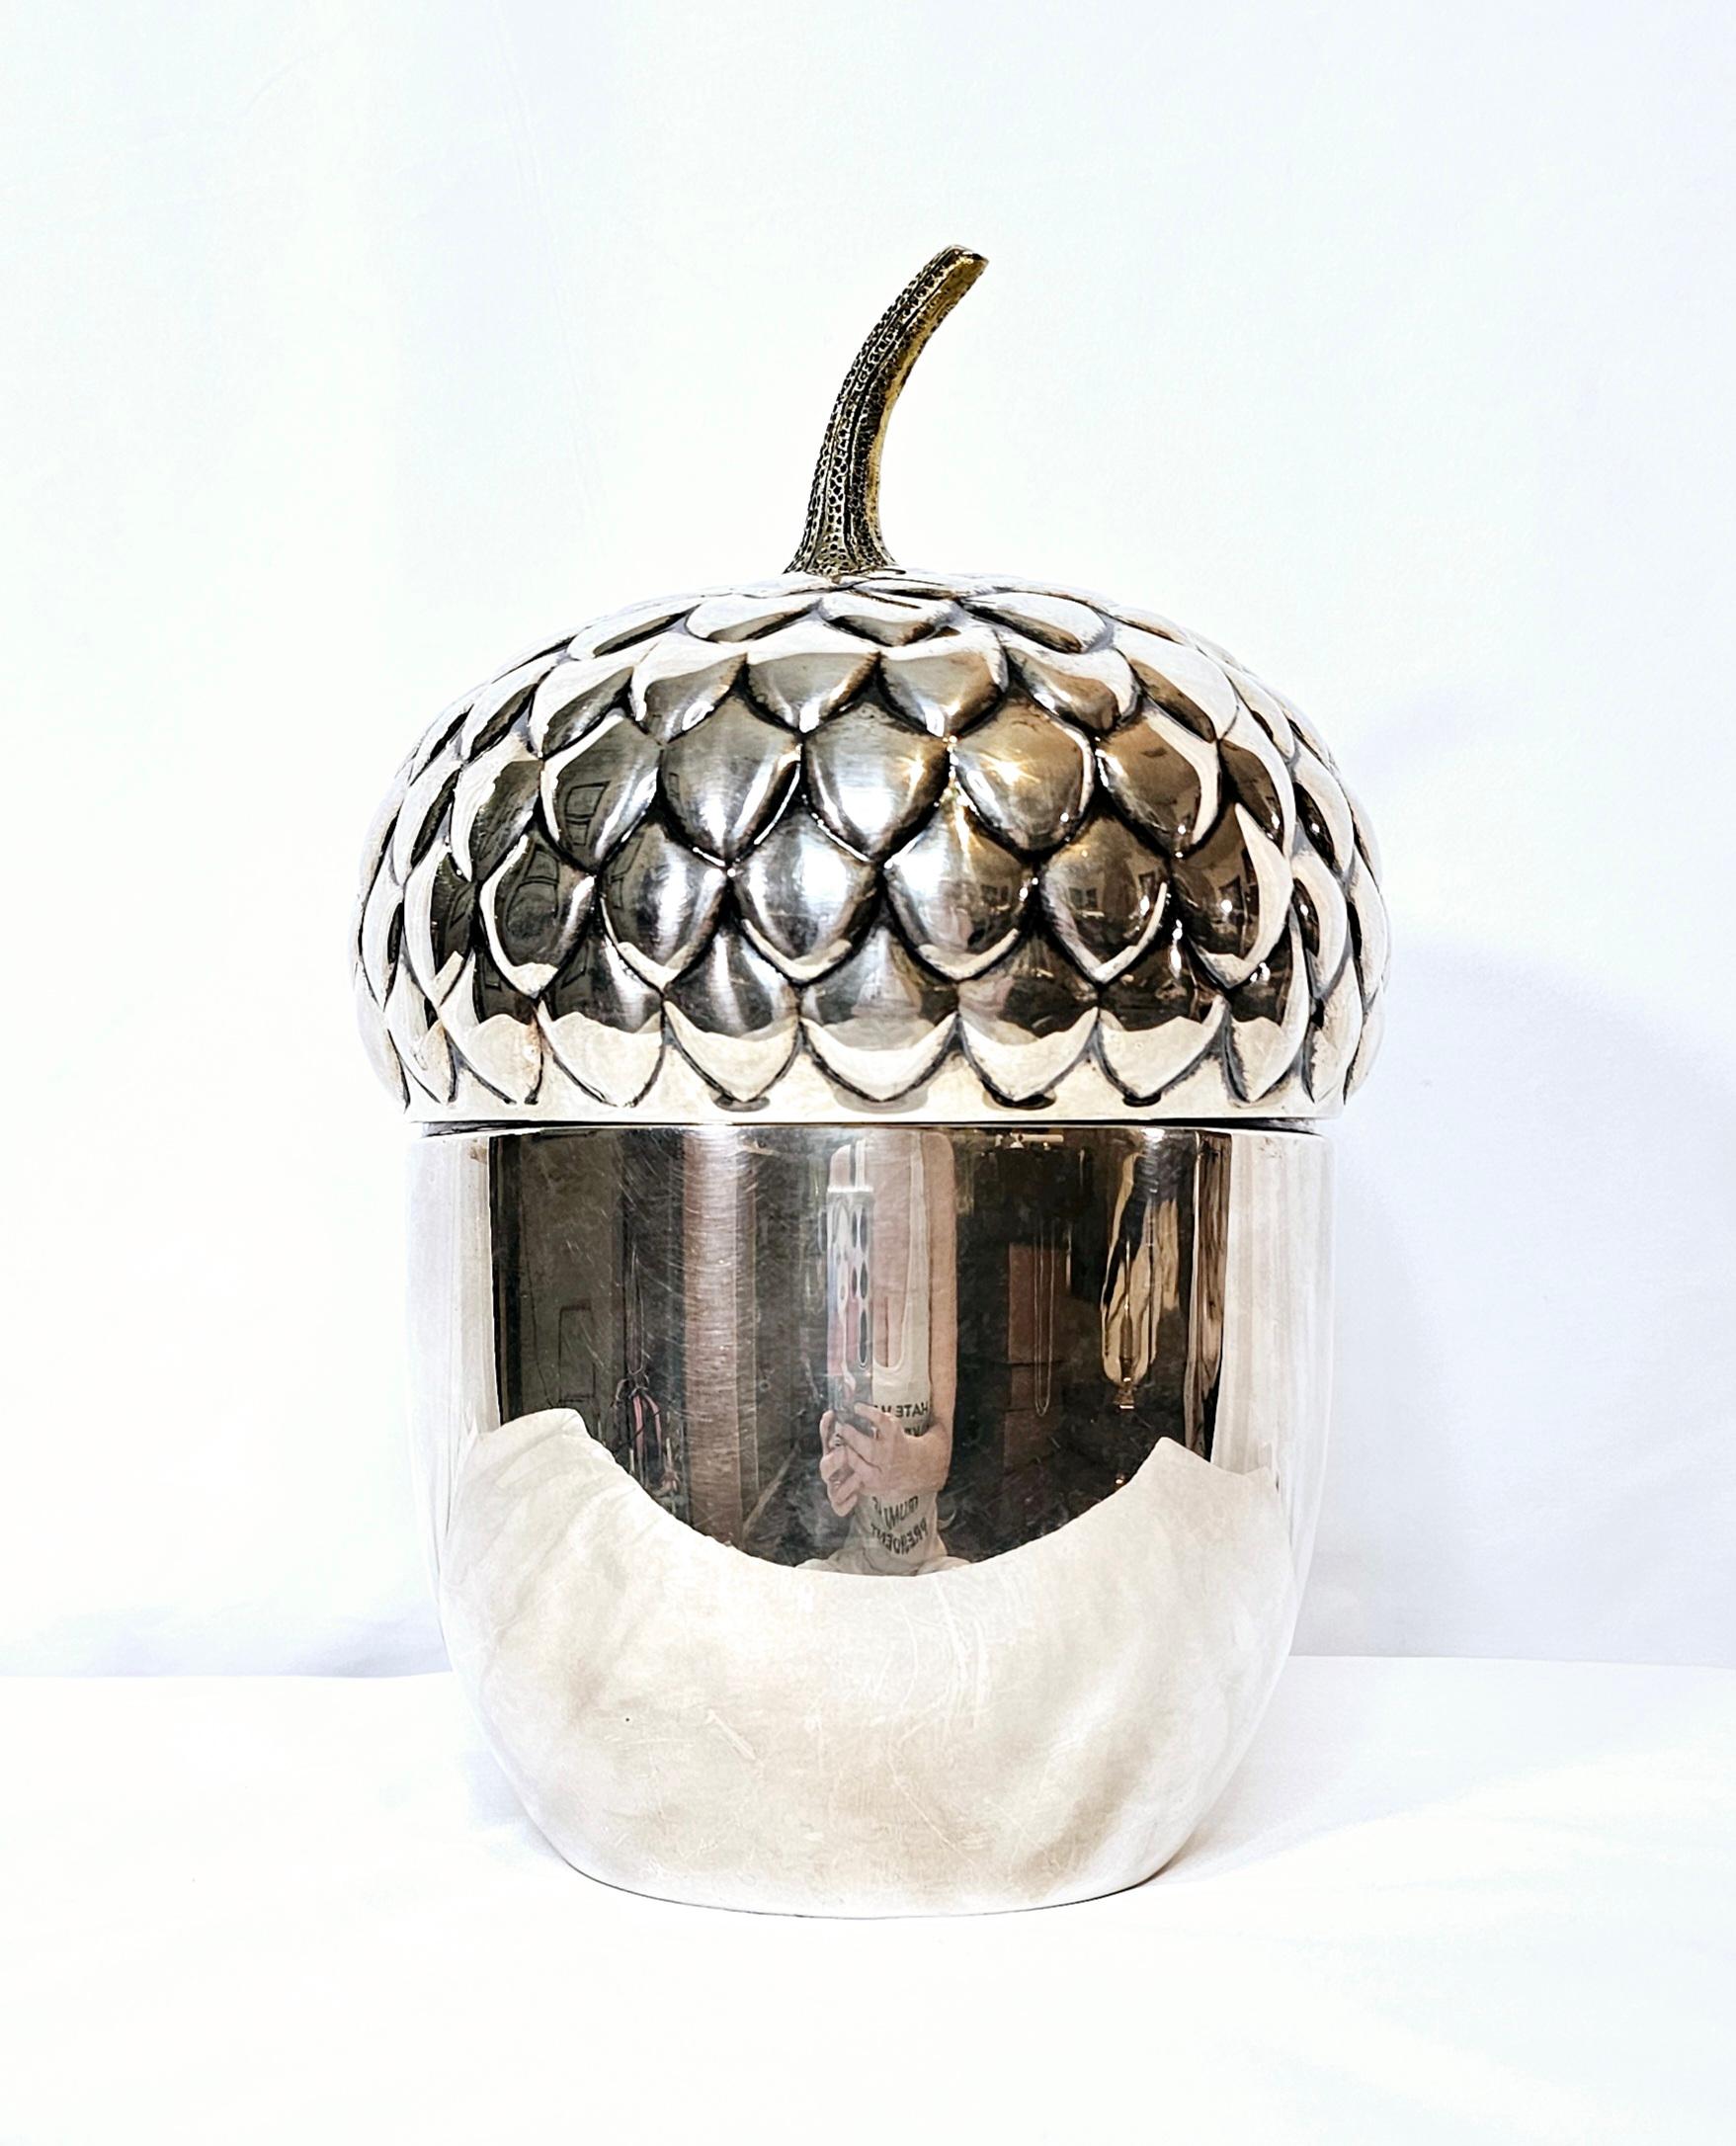 Acorn Shaped Ice Bucket by Teghini Firenze 1960s For Sale 4